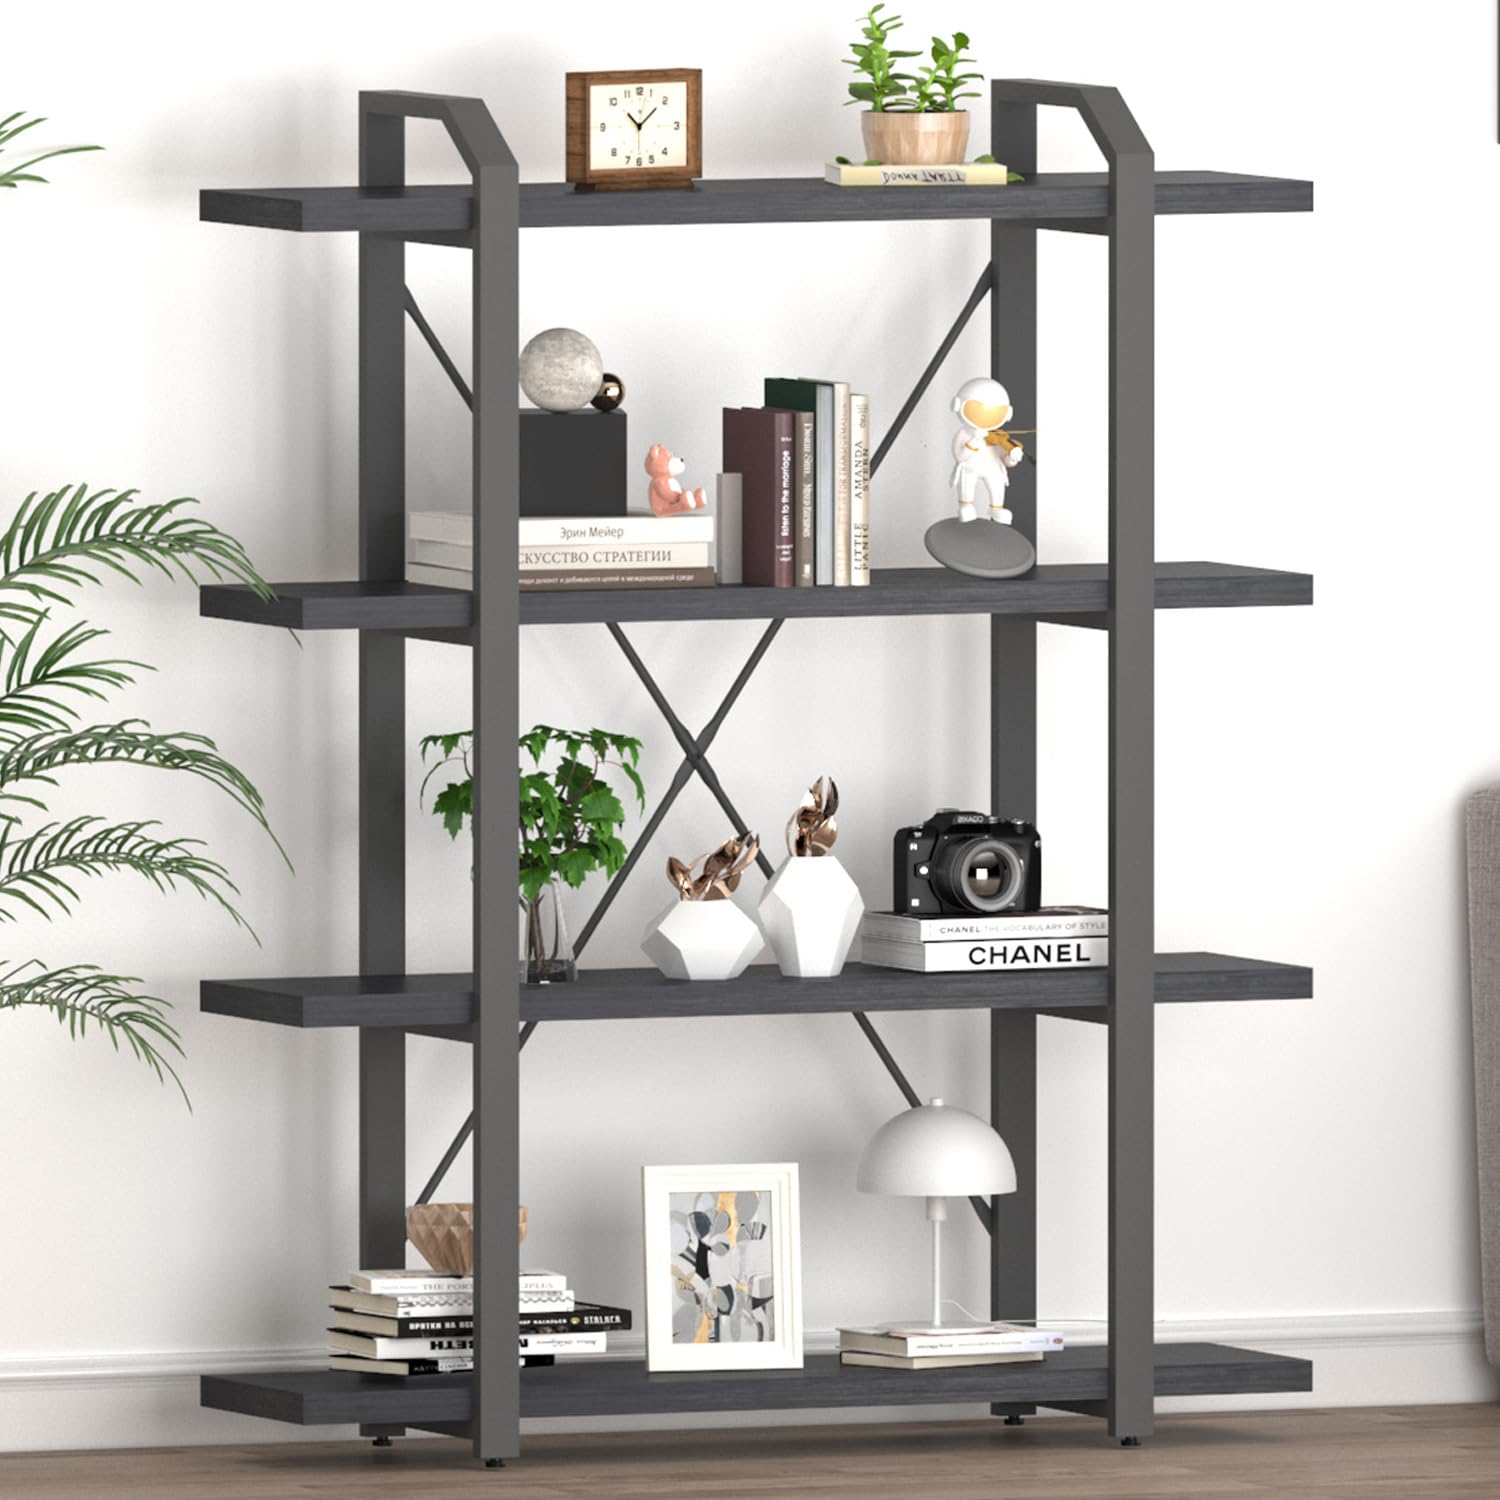 Great Choice Products Rustic Book Shelf, Industrial Bookshelf For Bedroom, Black Open Bookcase, Display Storage Shelf For Home Office, 4 Shelf